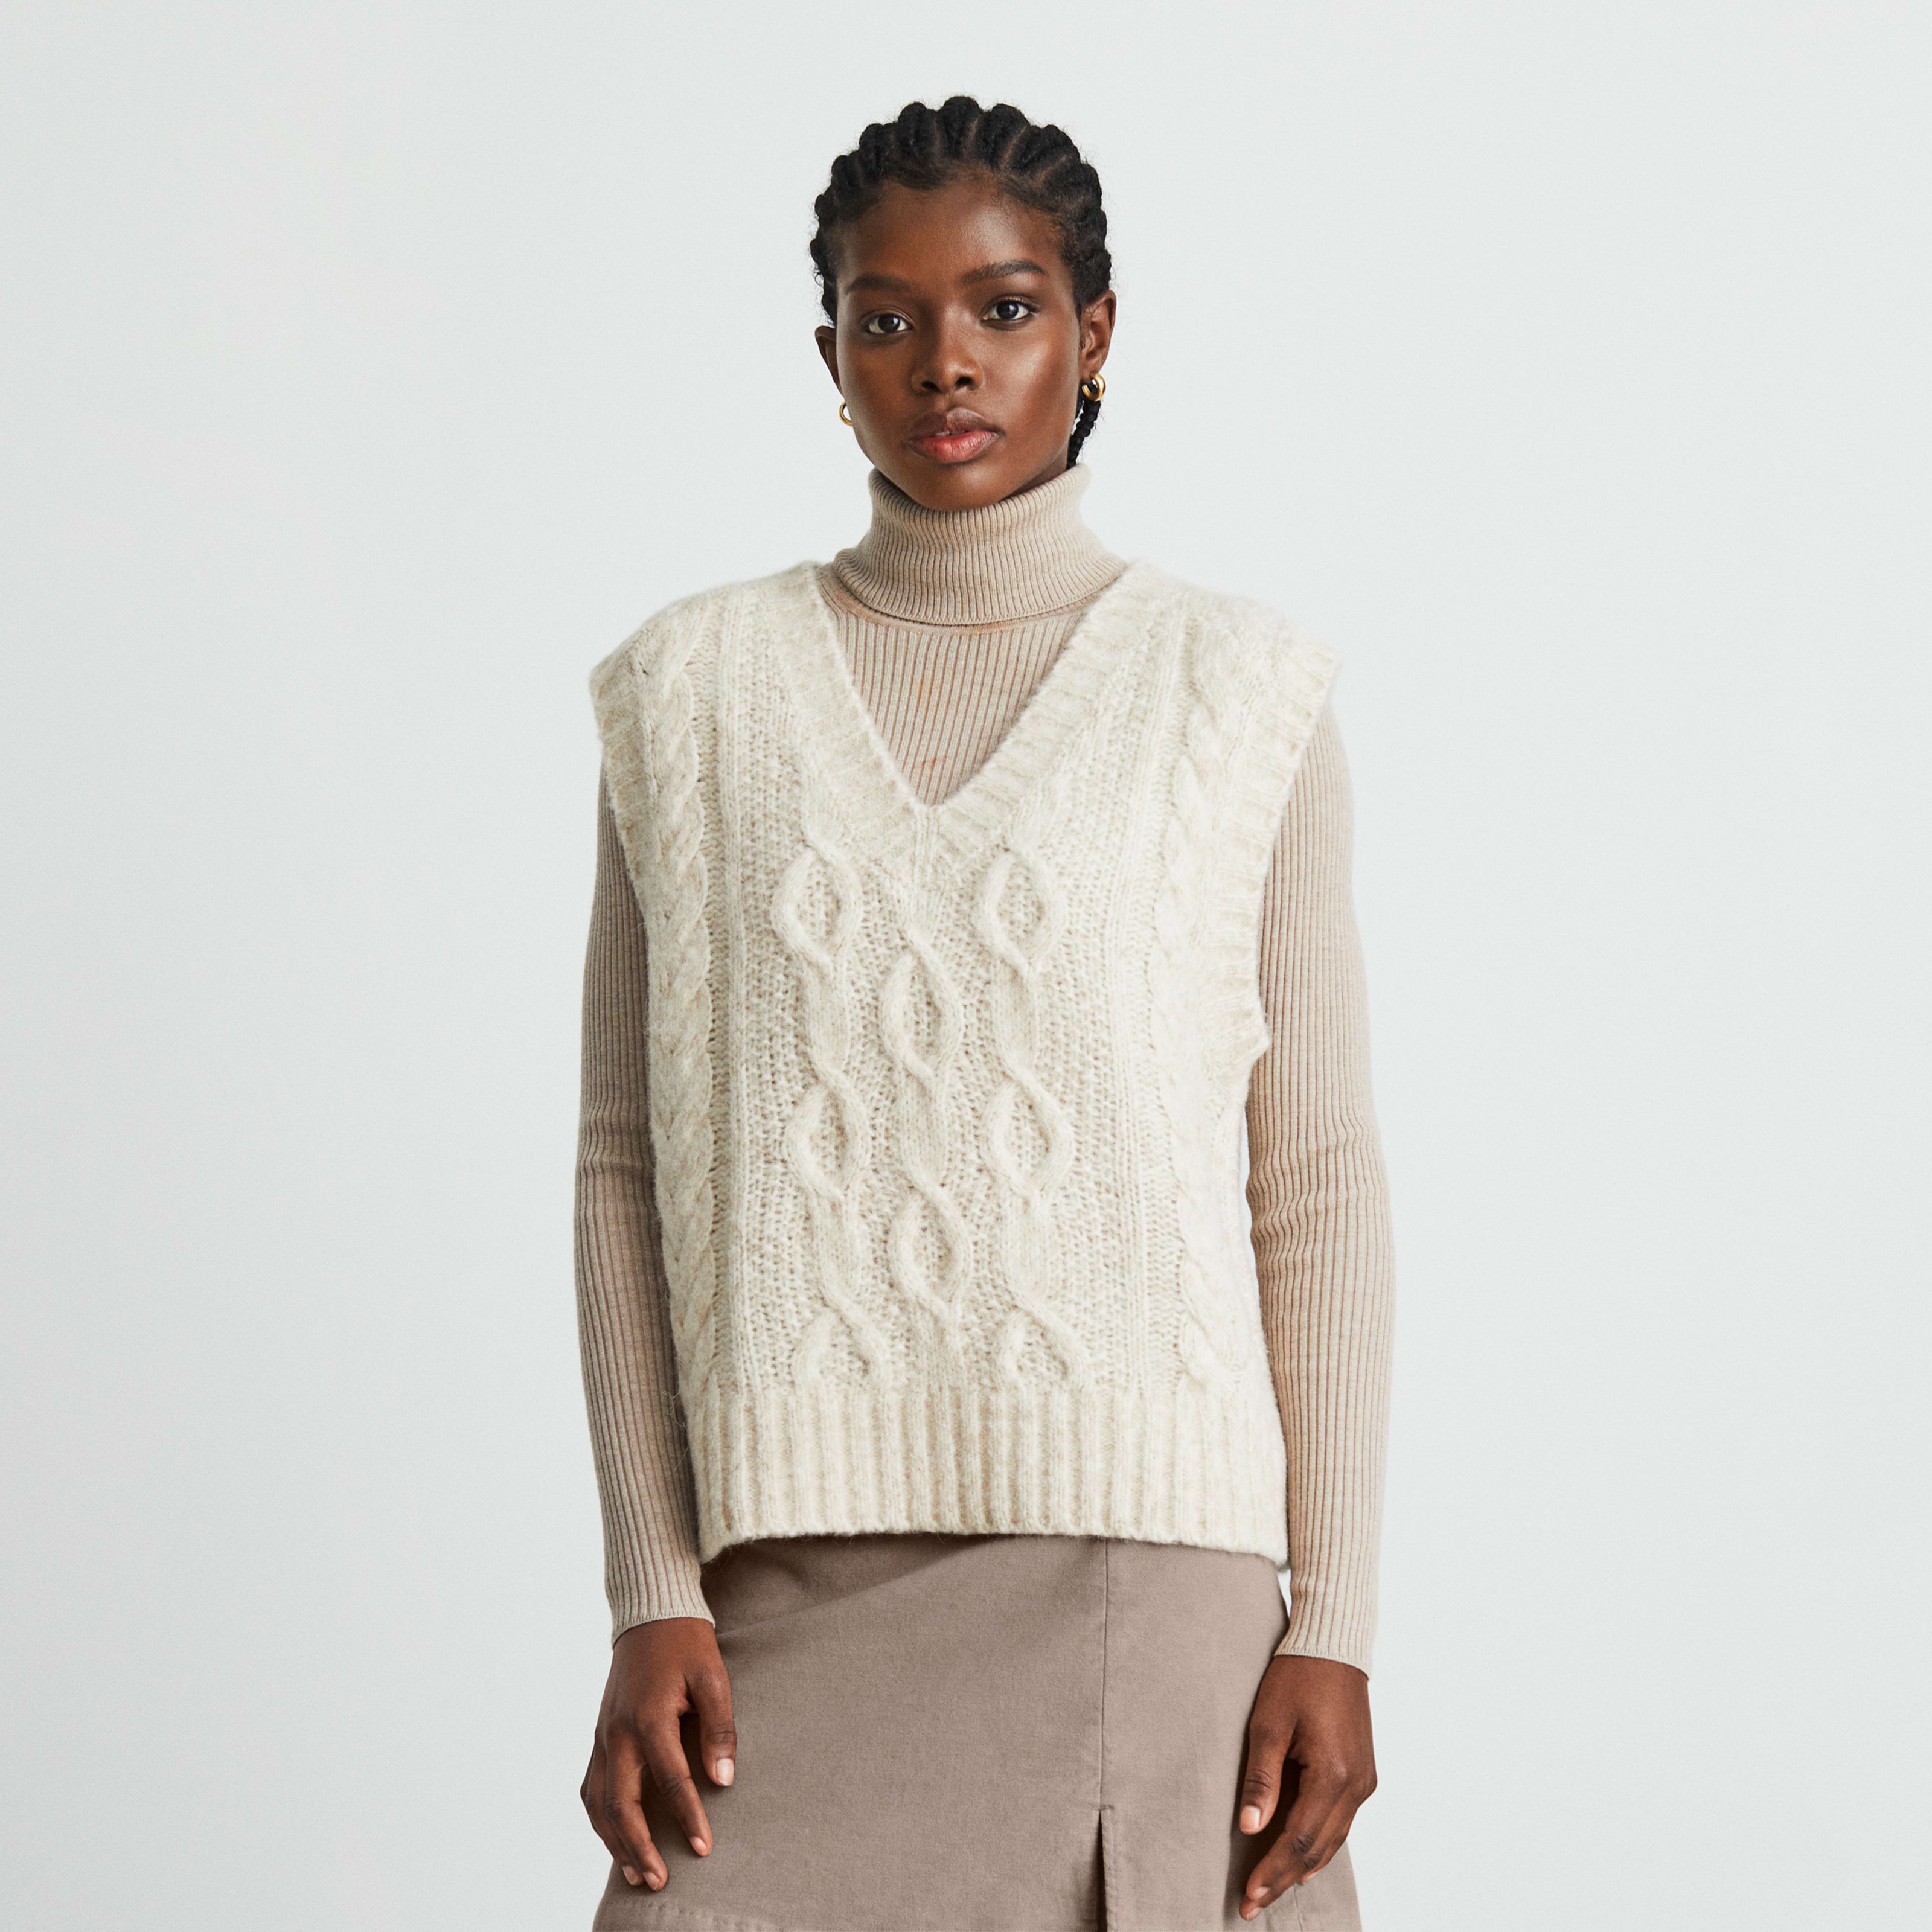 Women's Cloud Cable-Knit Vest Sweater by Everlane in Oatmeal, Size XXS | Everlane